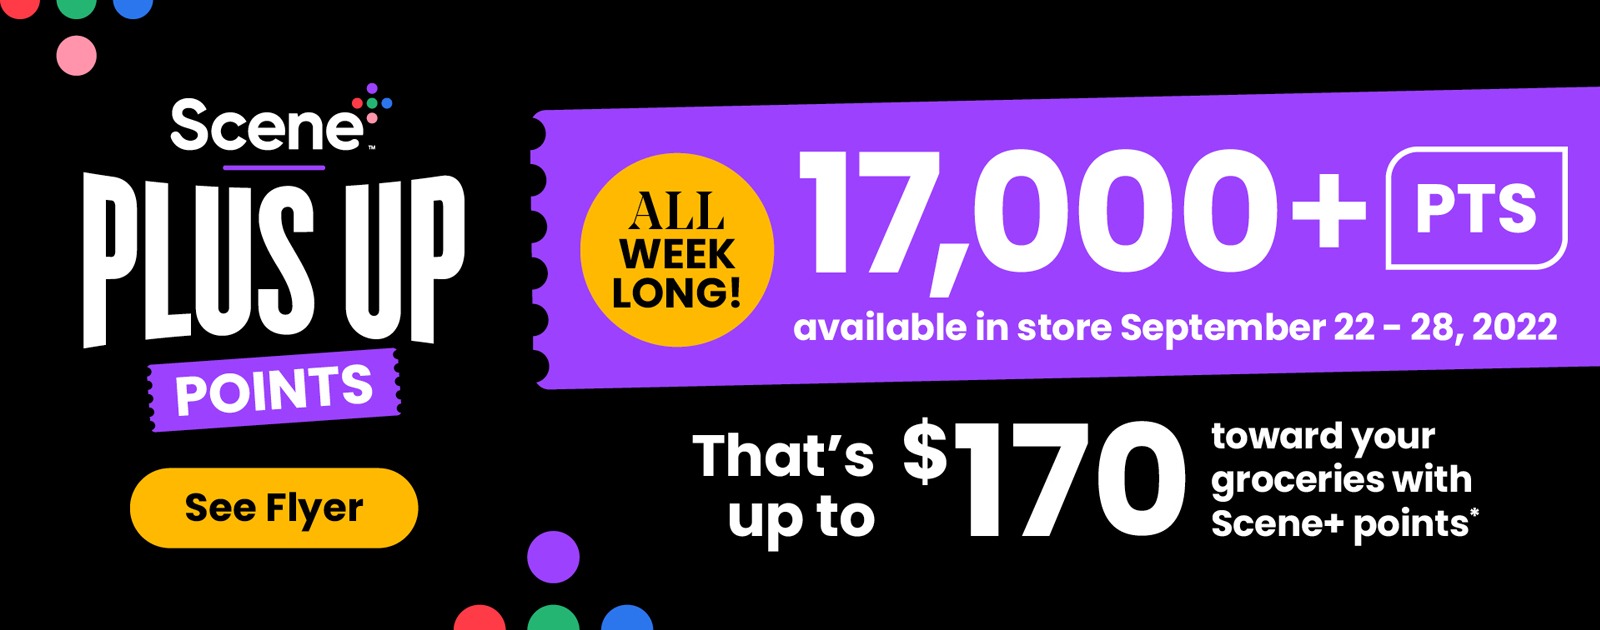 Text Reading 'Scene+ Plus Up Points. All week long! 17,000+ points available in store September 22-28, 2022. That's $170 up to toward your groceries with Scene+ points. Click on 'See Flyer' button to learn more.'